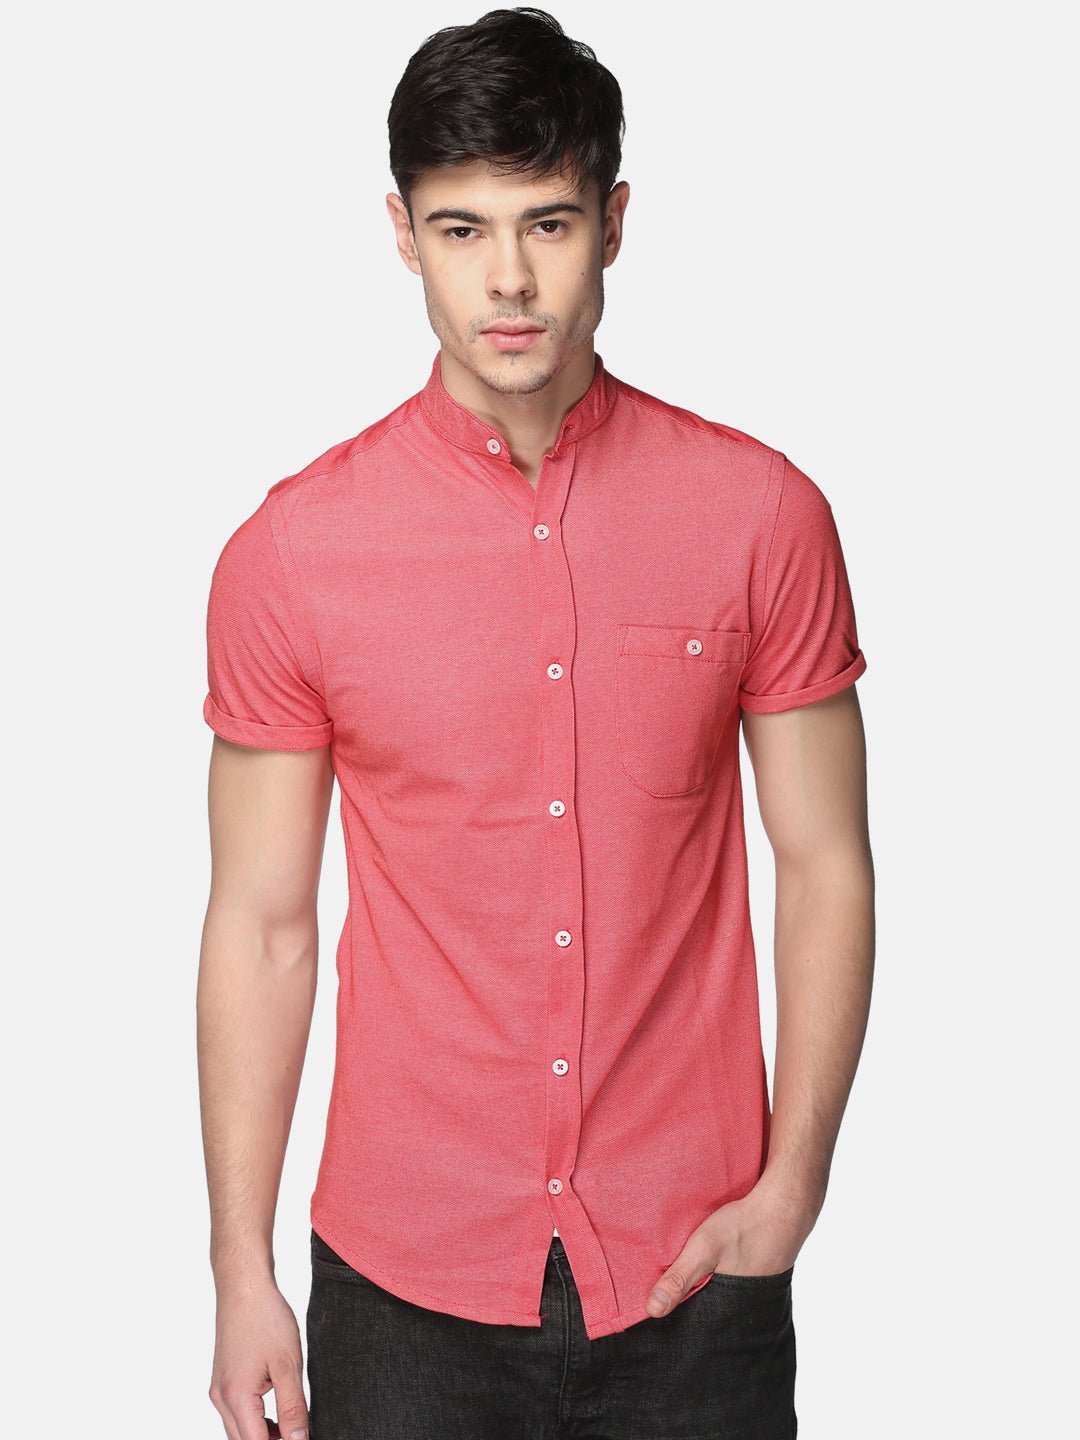 Red Knitted Shirt - clubyork